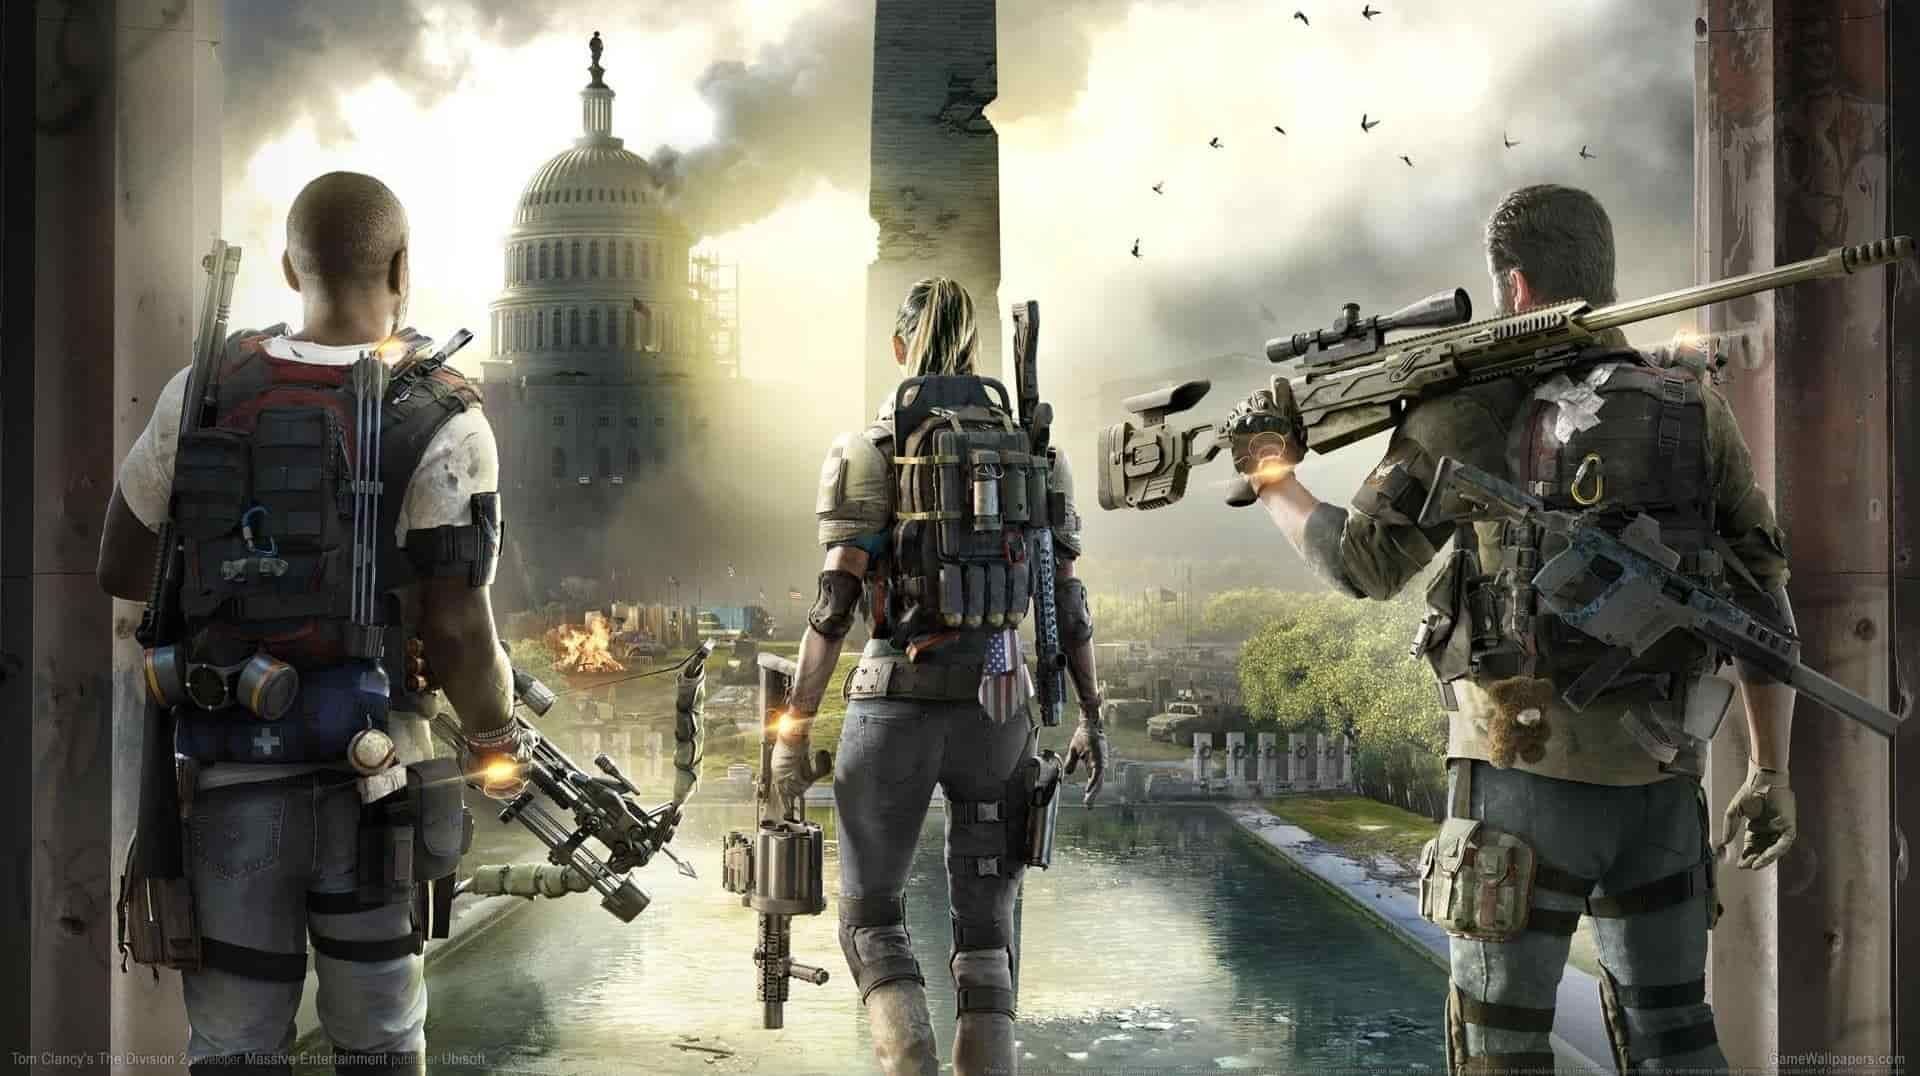 The Division 2 Adding Mode In 2021 That Is 'Entirely New' To The Series - PlayStation Universe